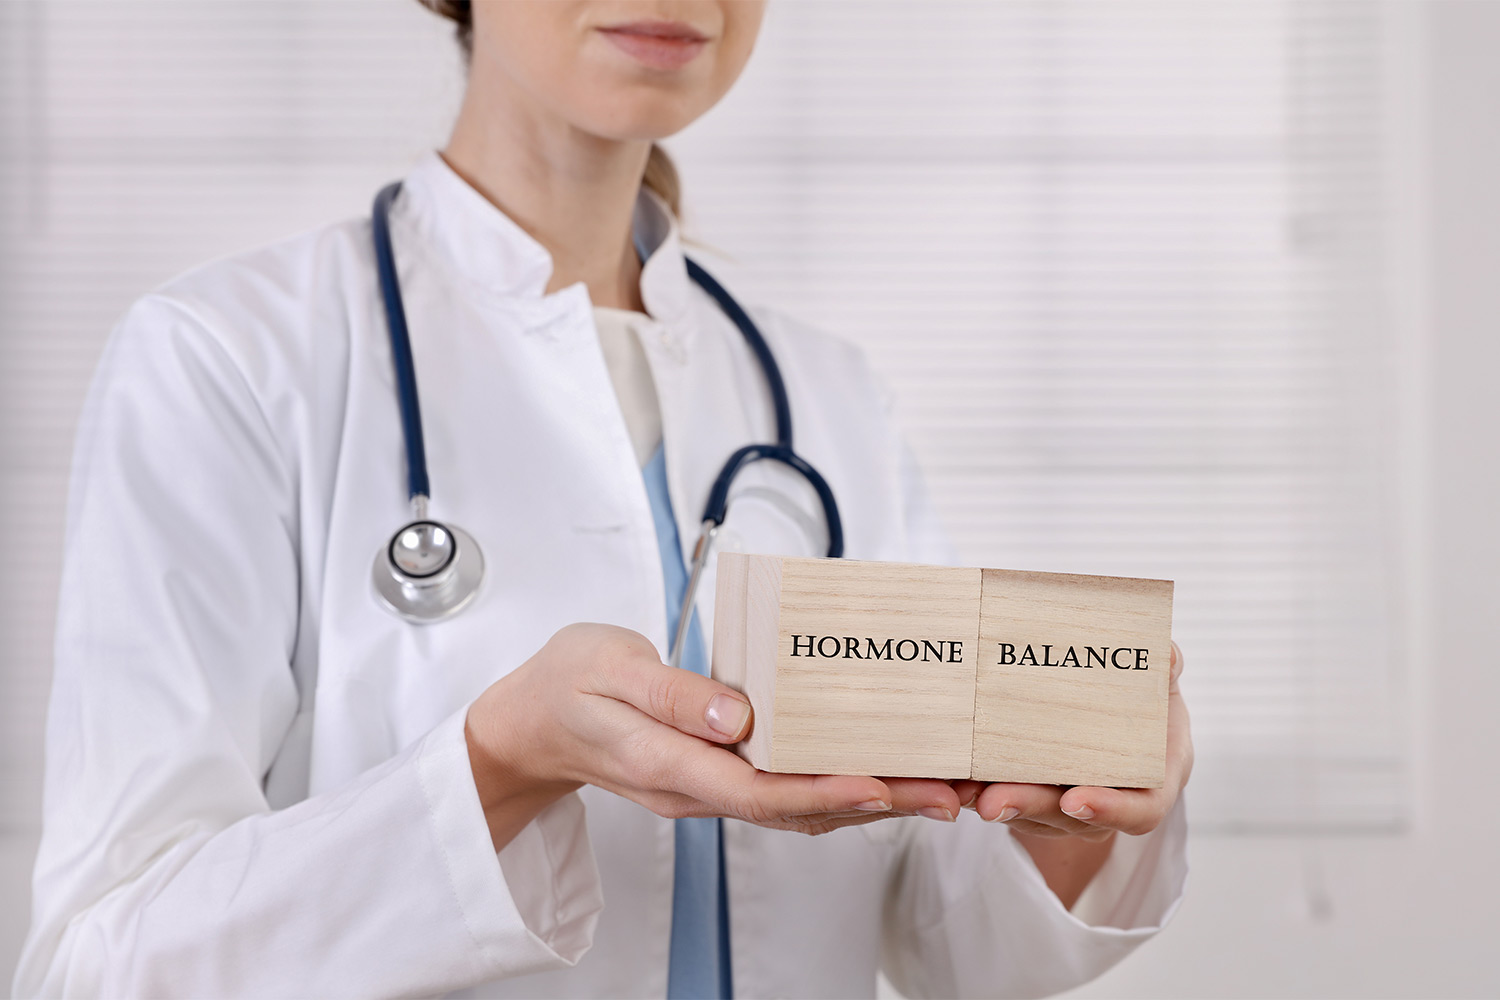 Hormone Balance: The Full Guide To Imbalanced Hormones